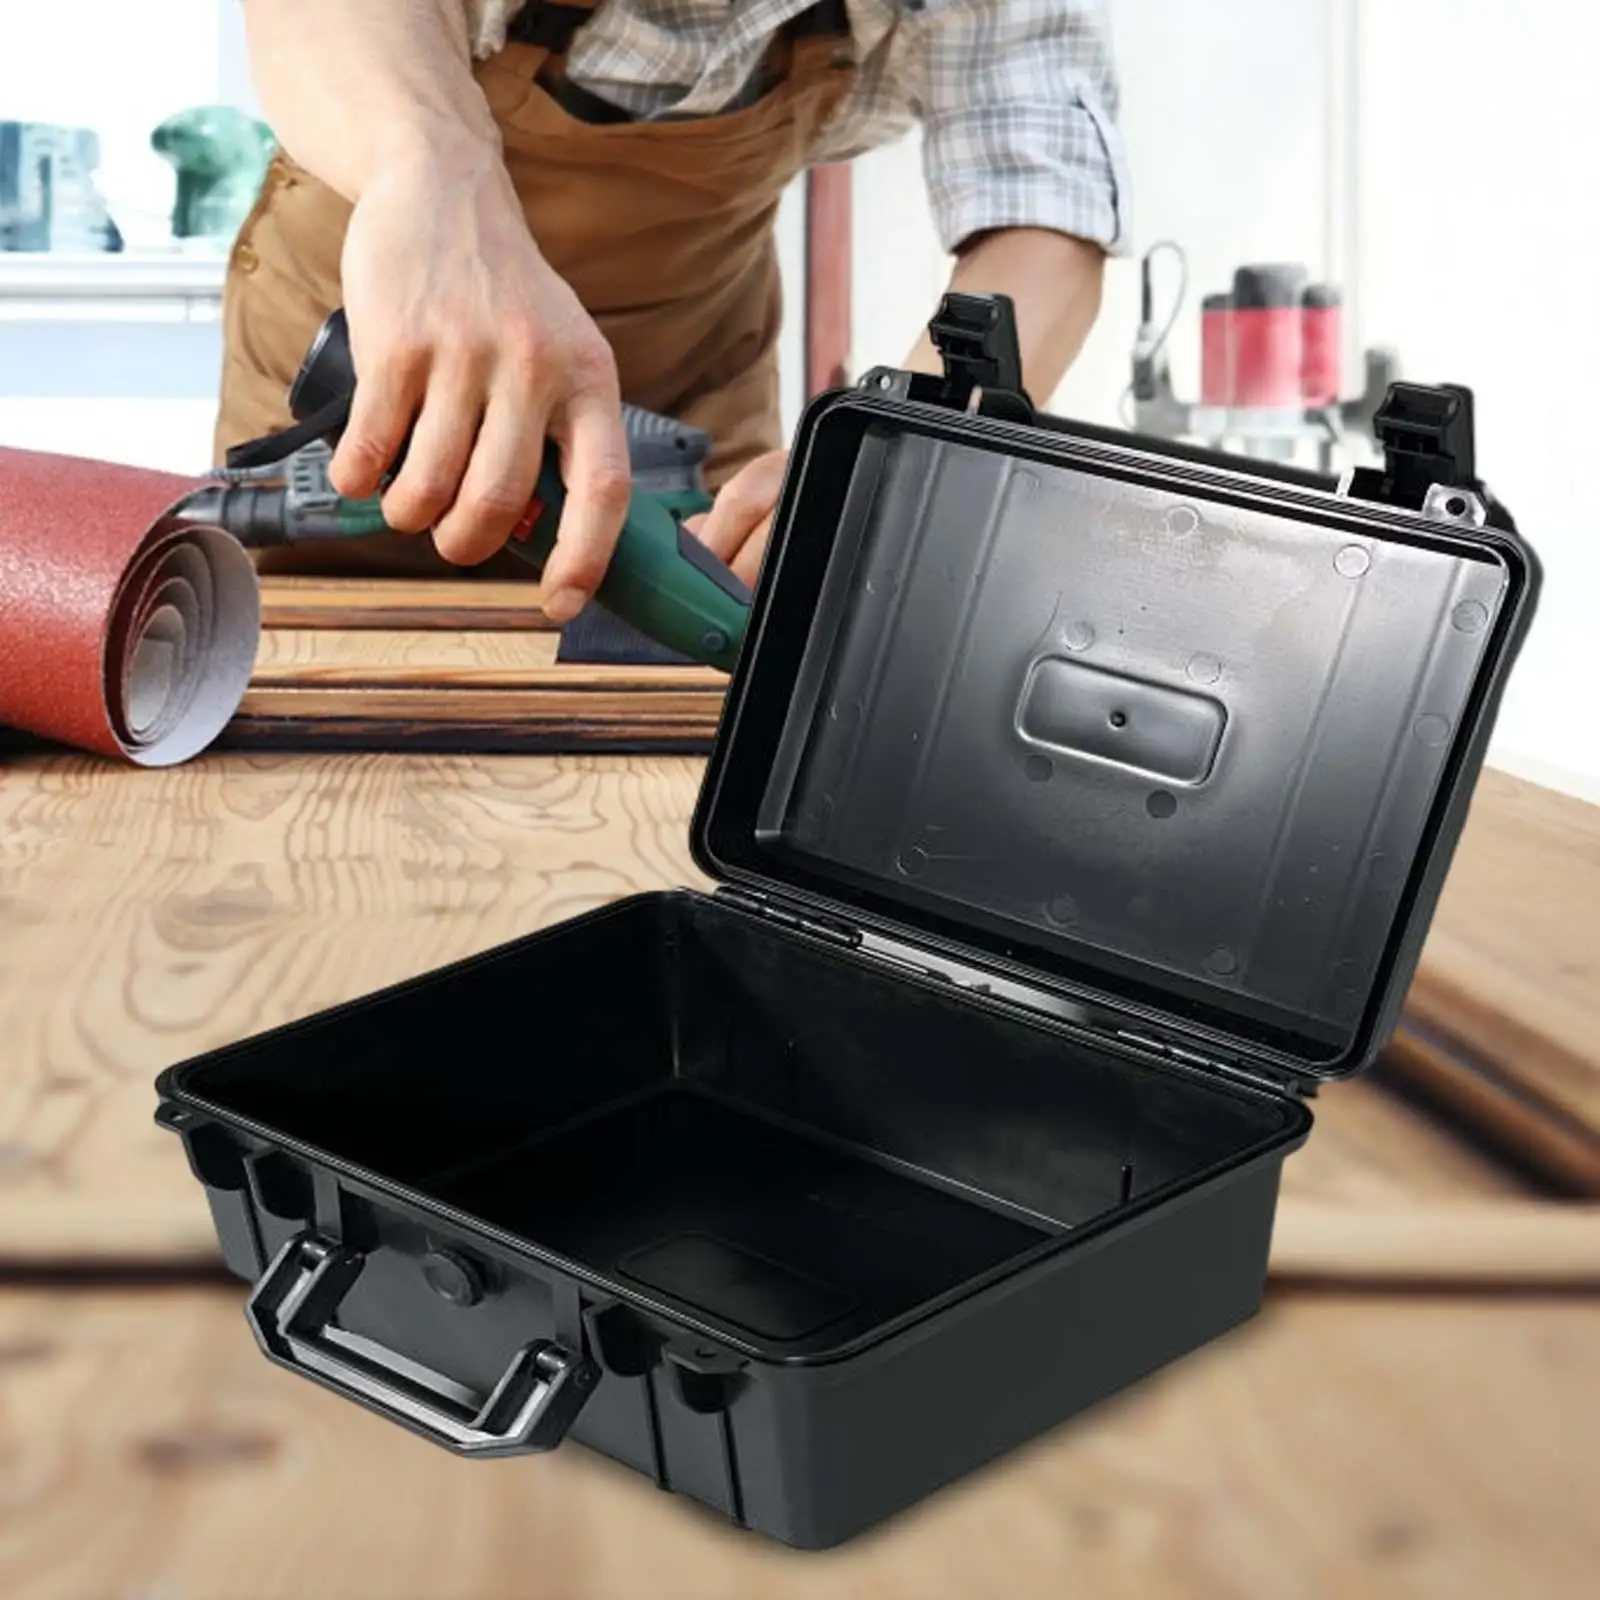 Toolbox Storage Box Multifunction Hardshell with Handle Durable Portable Organizer Carrying Case Large Space for Car Garage